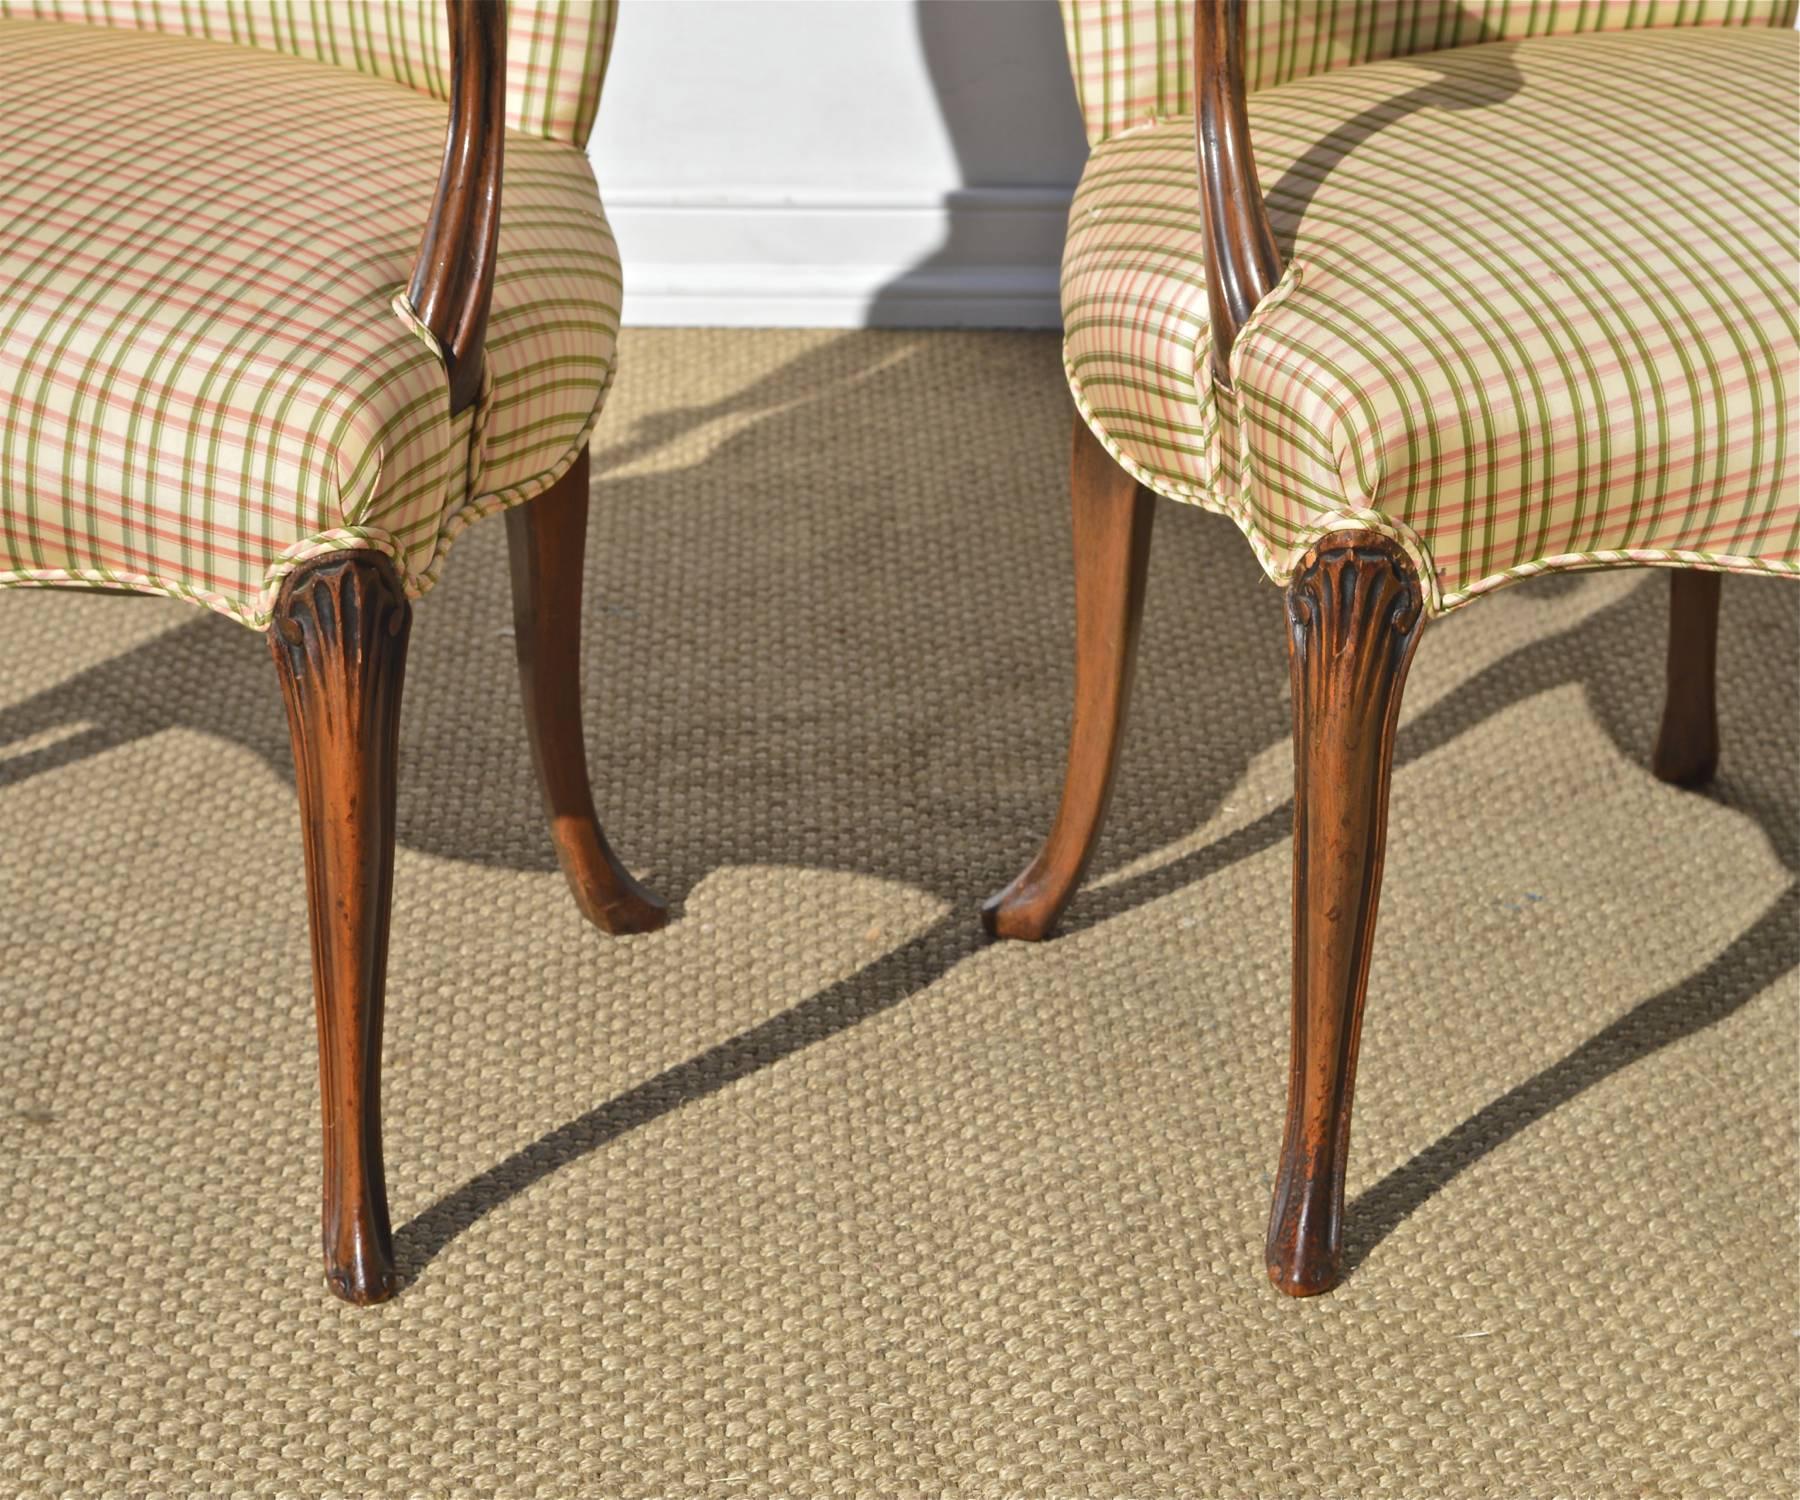 A fantastic pair of carved fruitwood library chairs in the Georgian taste dressed up in an iconic Brunschwig & Fils silk check of cream, pink and green. Traditional seating is always in fashion. The chairs sit well and are inviting. Two-three tears